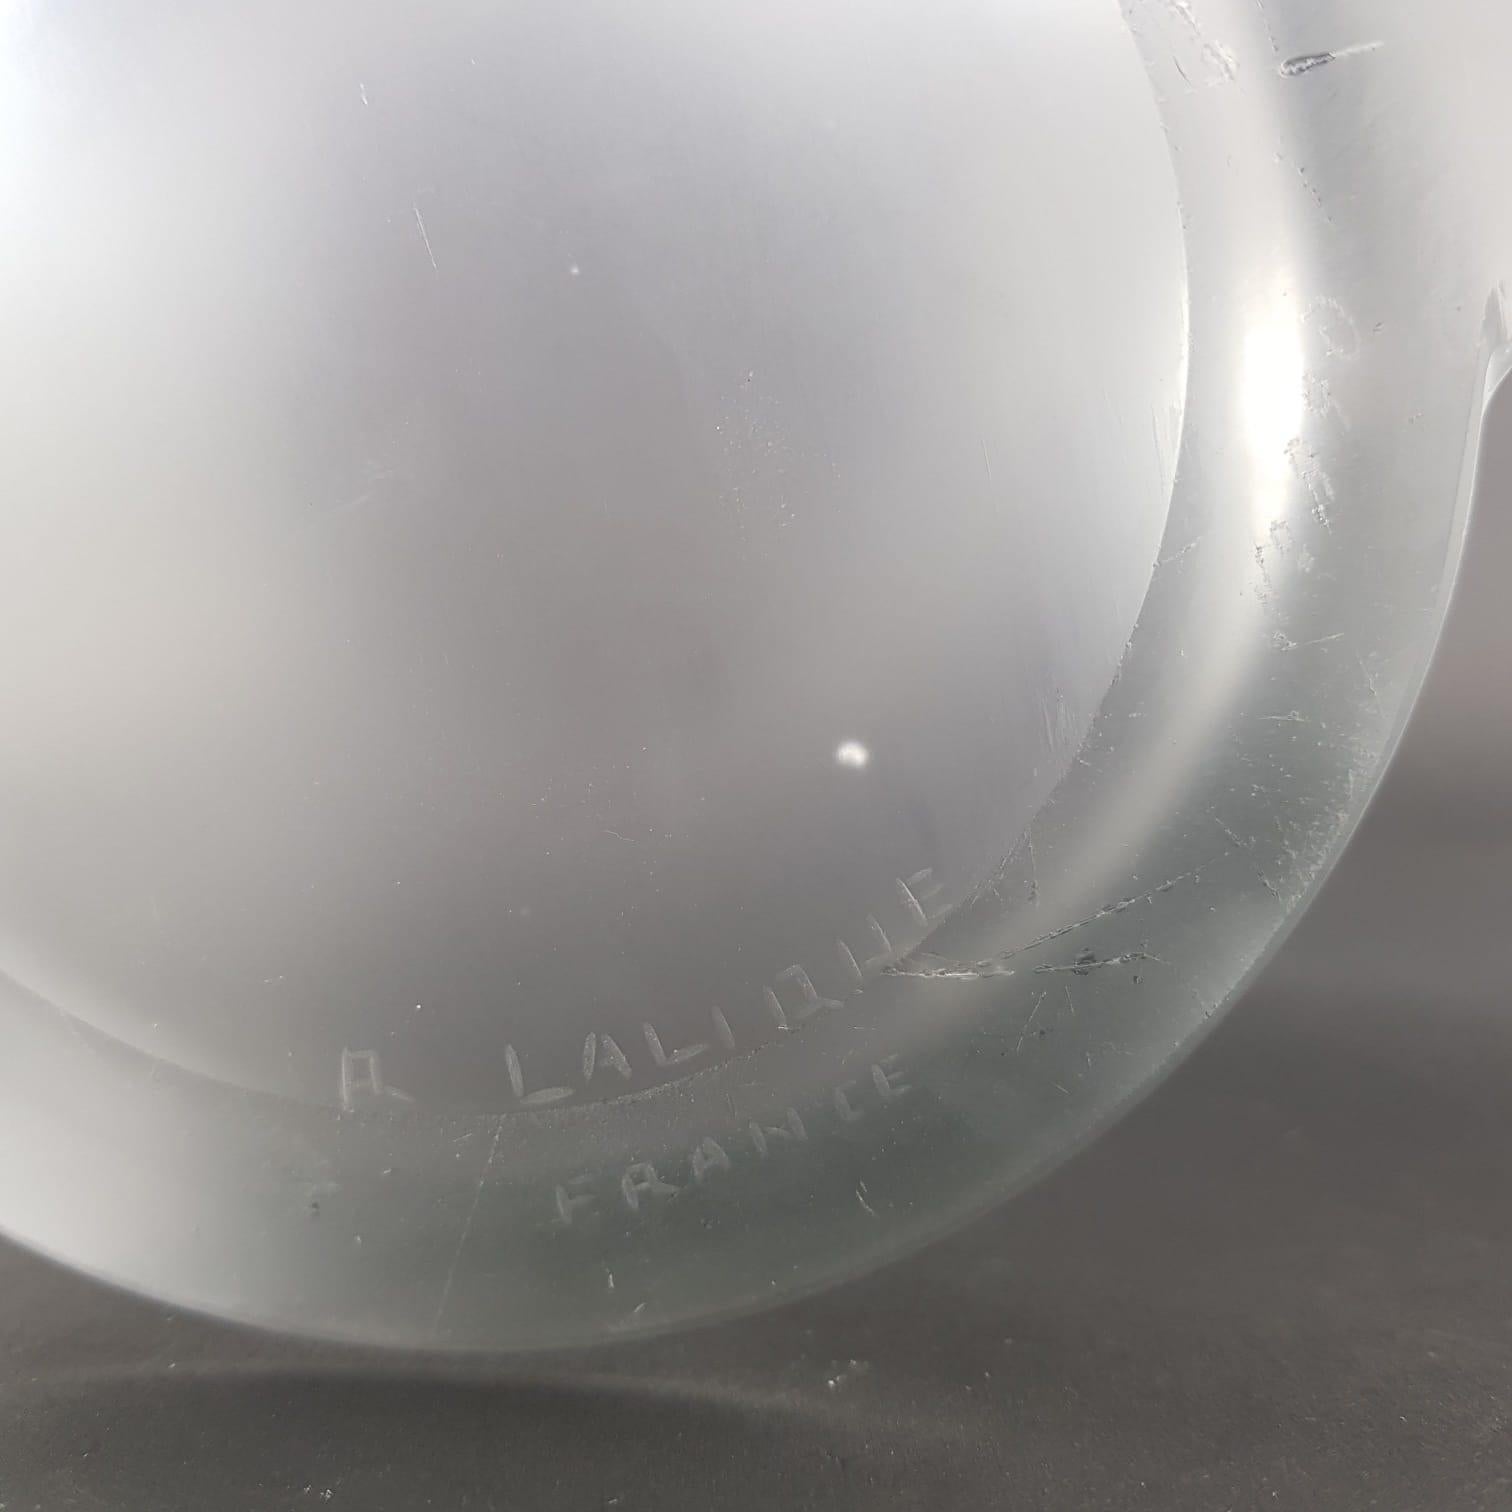 1926 Rene Lalique Pierrefonds Vase in Clear and Acid Satin Finish Glass 4